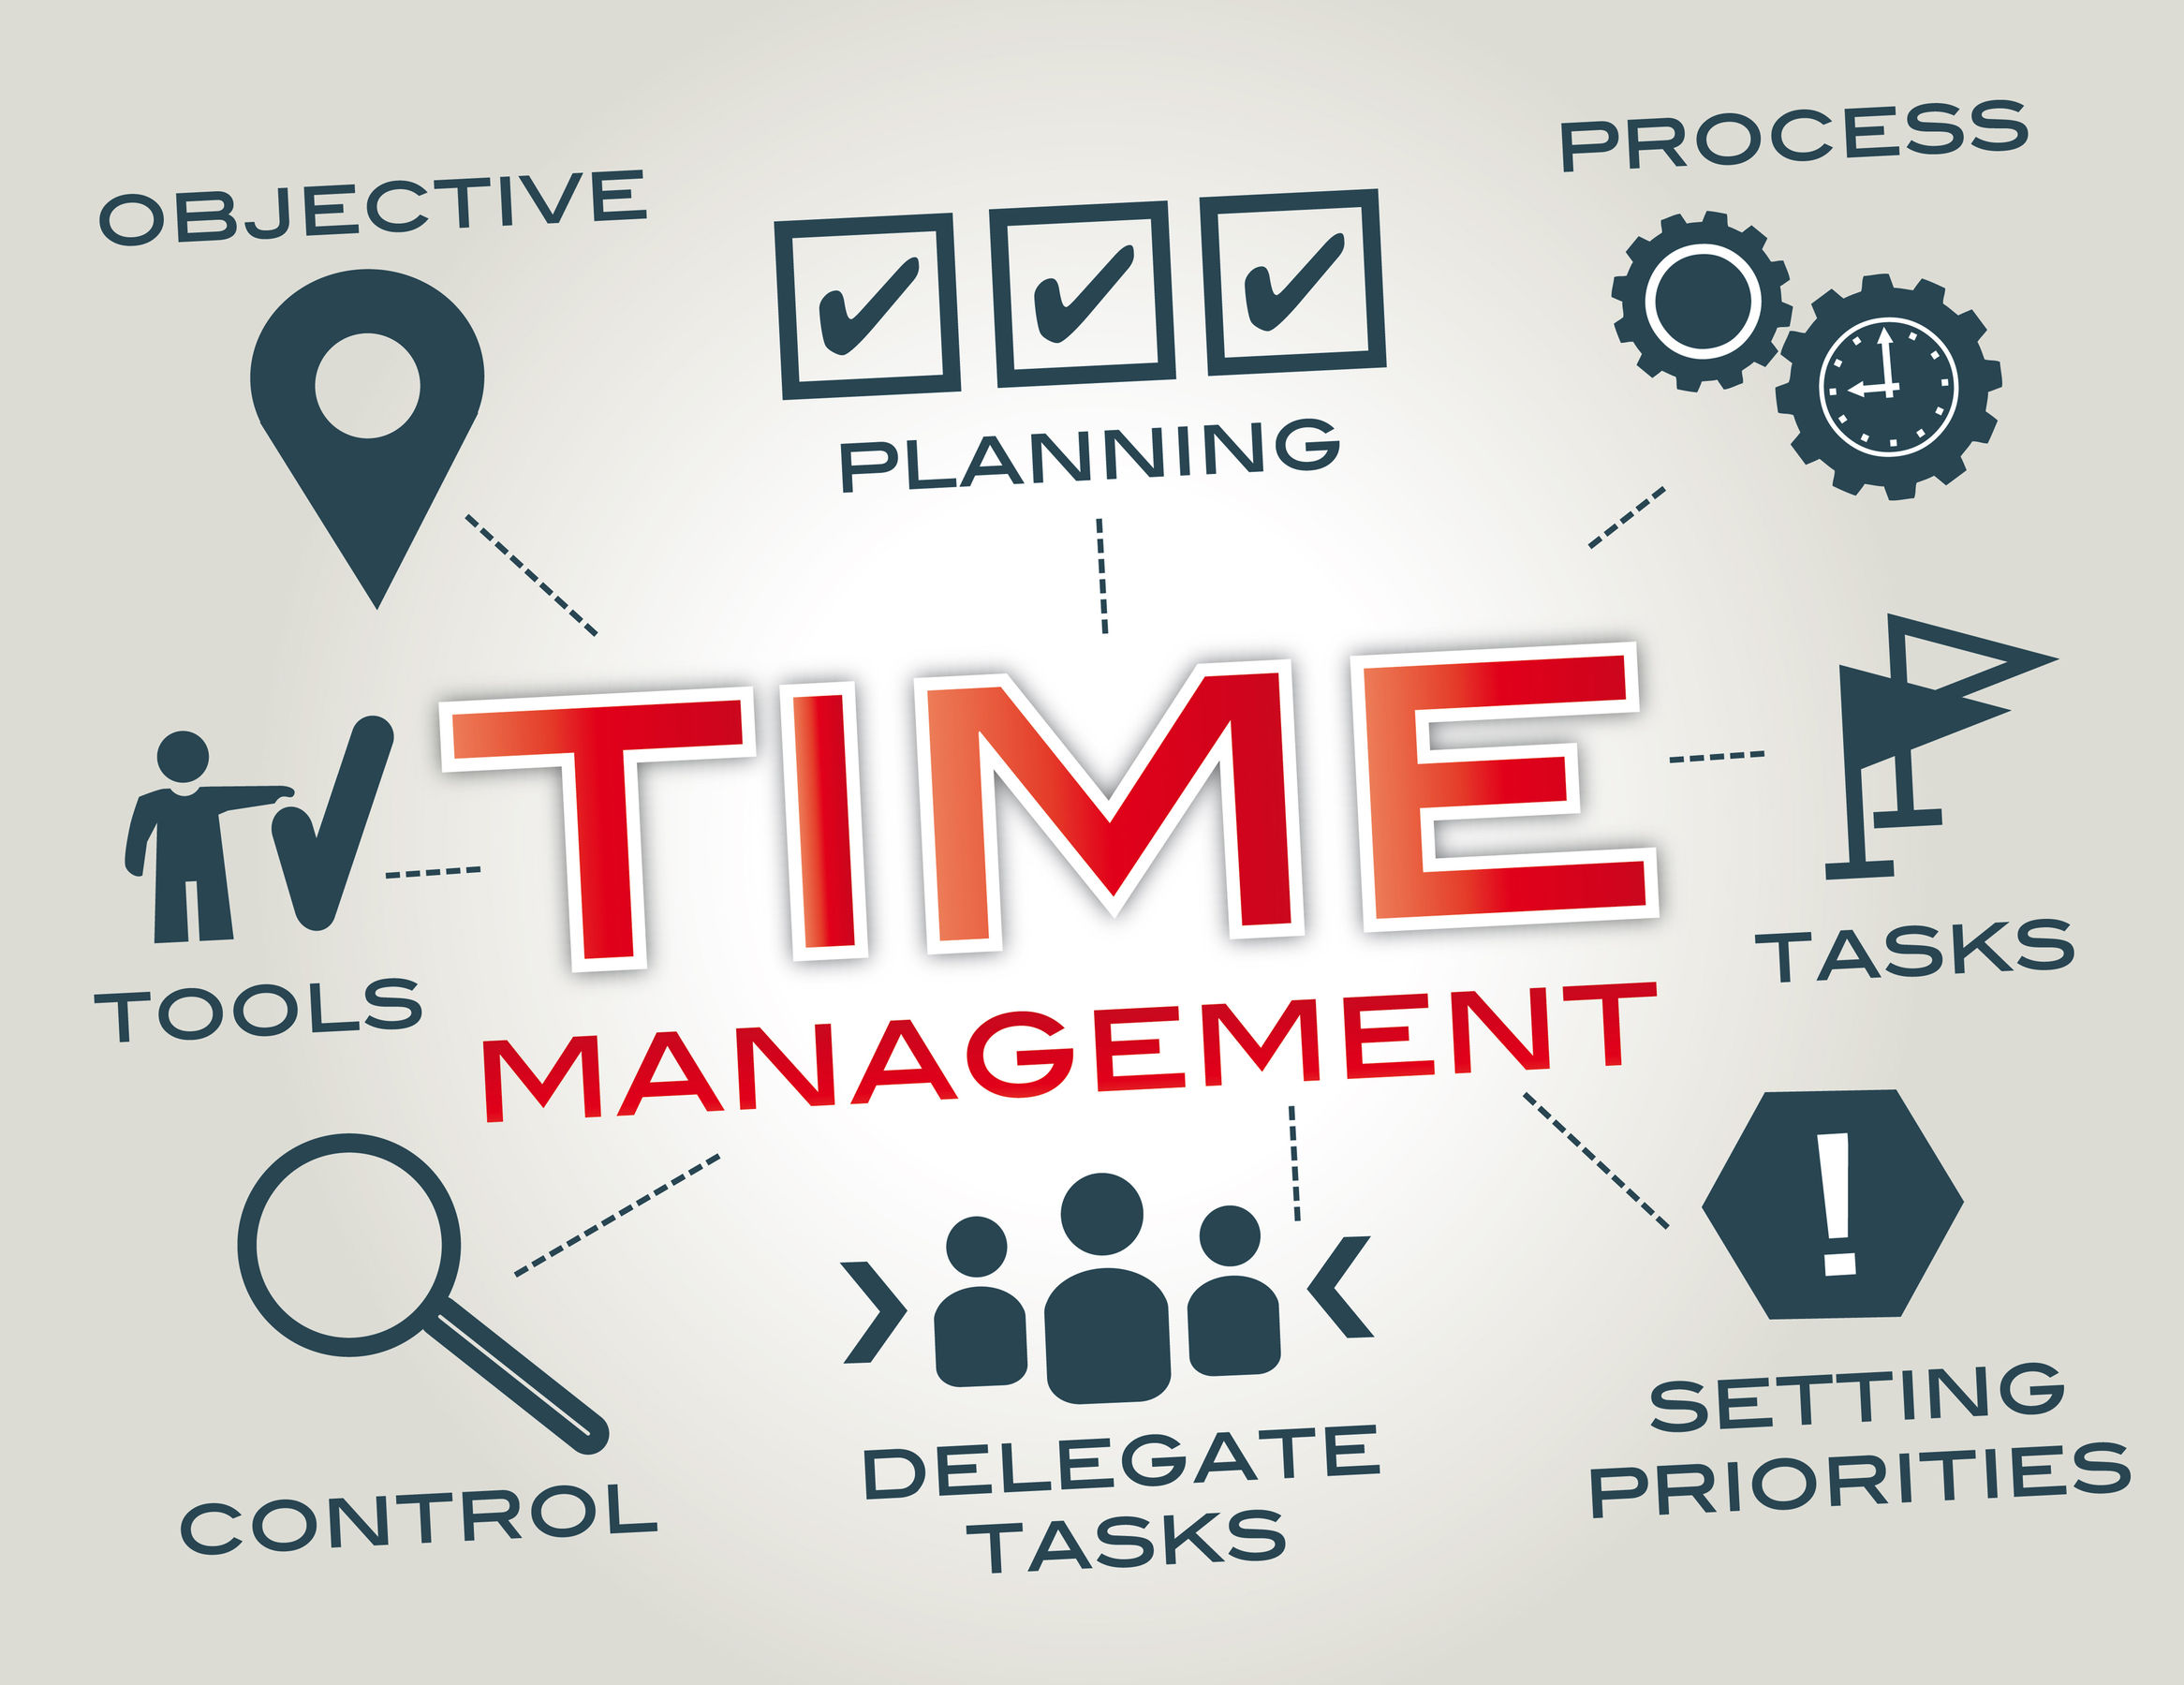 What are 4 time management skills you should have?